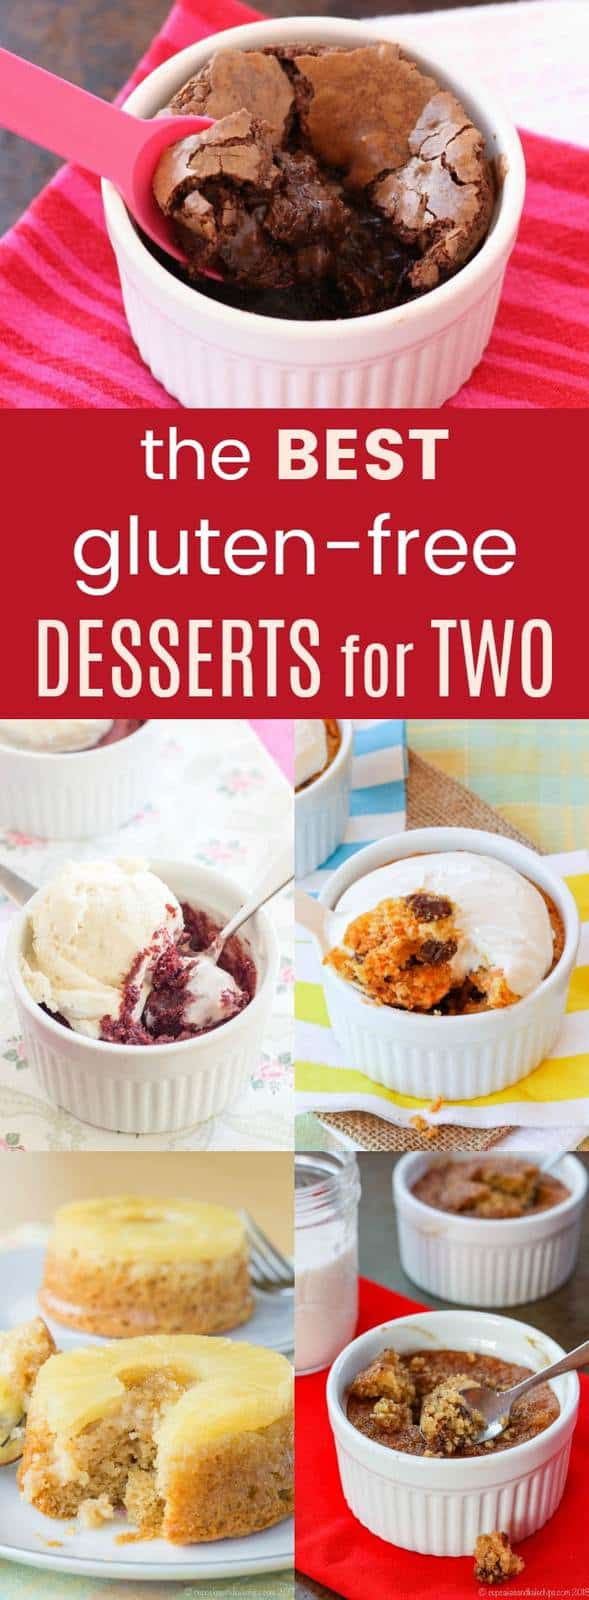 Best Gluten Free Desserts
 Best Gluten Free Dessert for Two Recipes Cupcakes & Kale